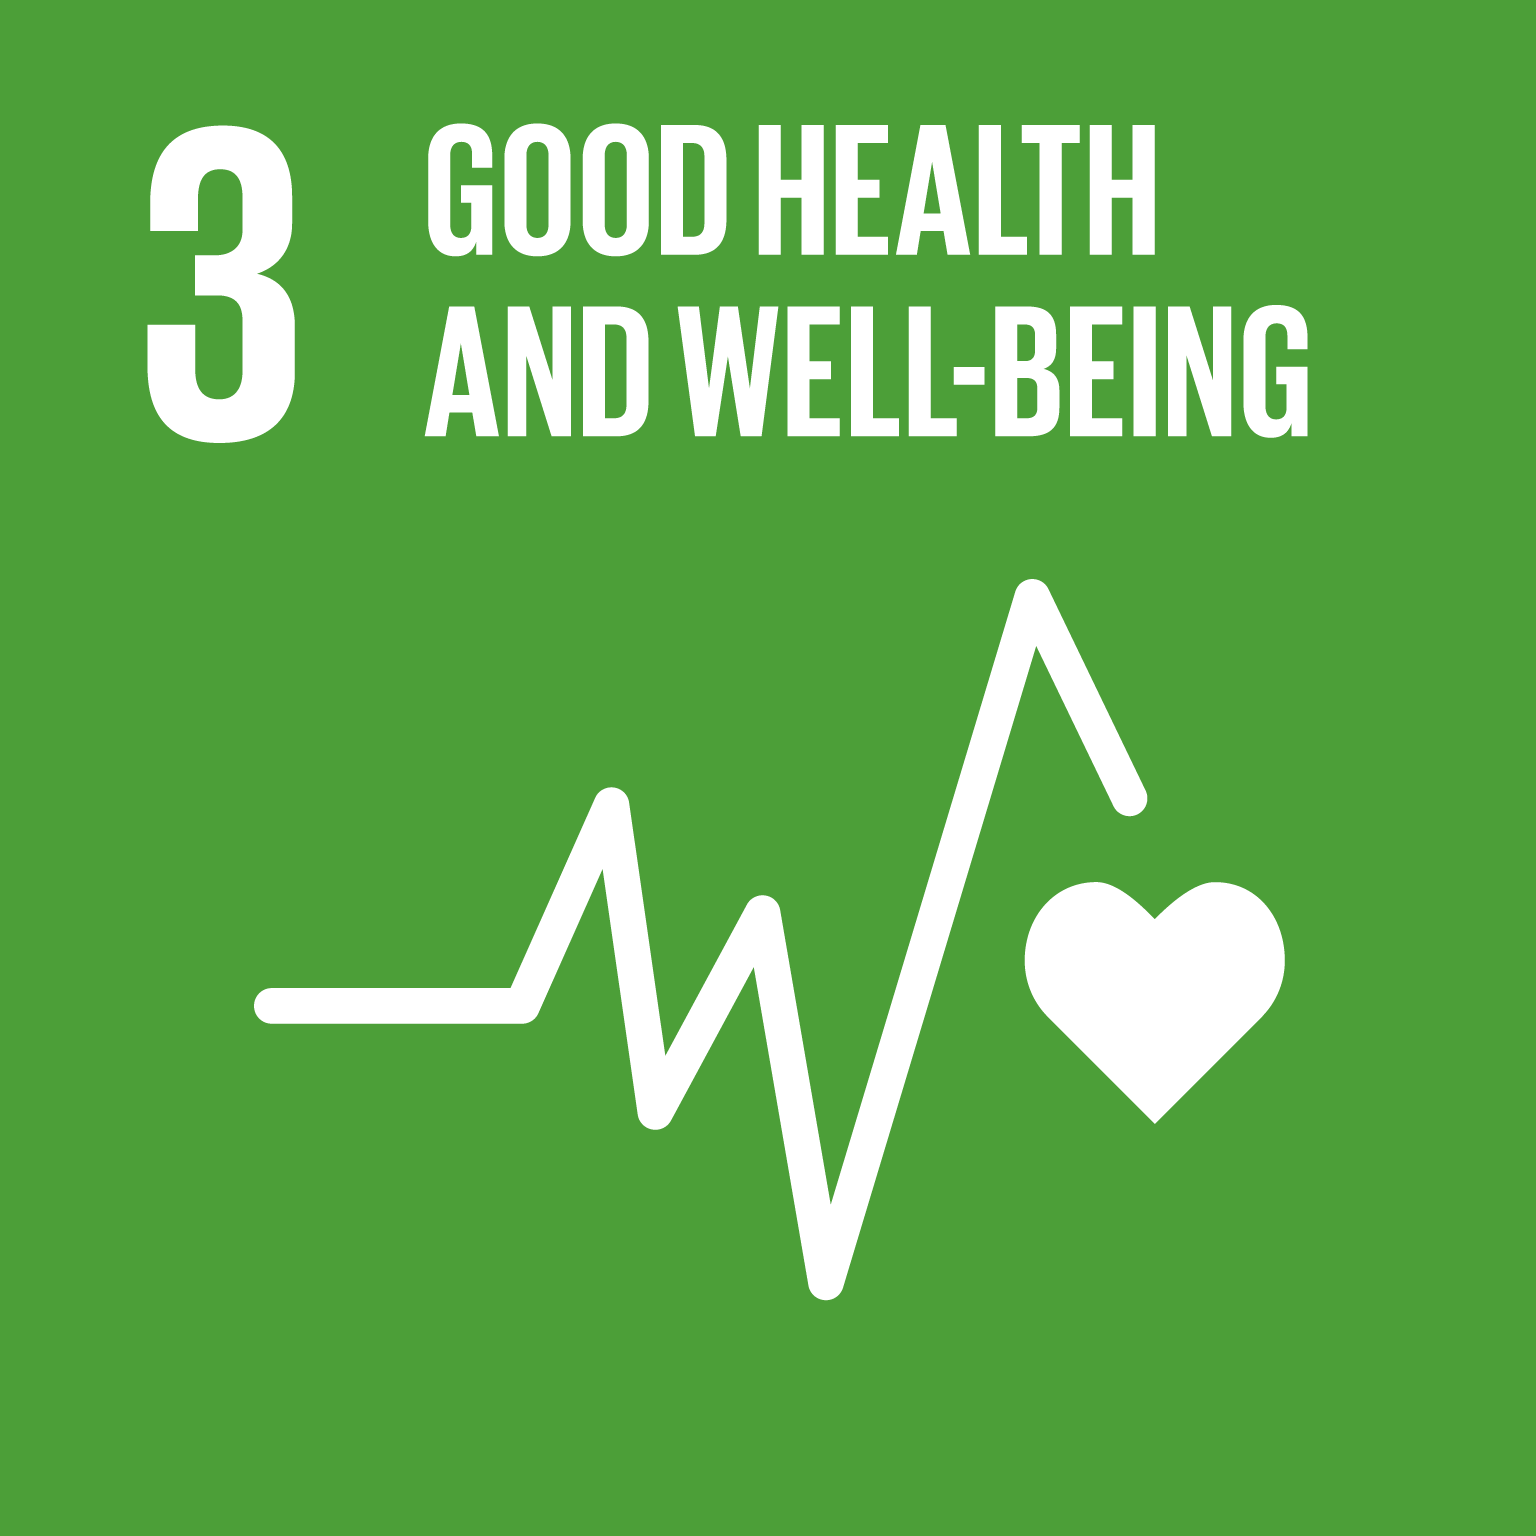 【SDGs logo】GOOD HEALTH AND WELL-BEING